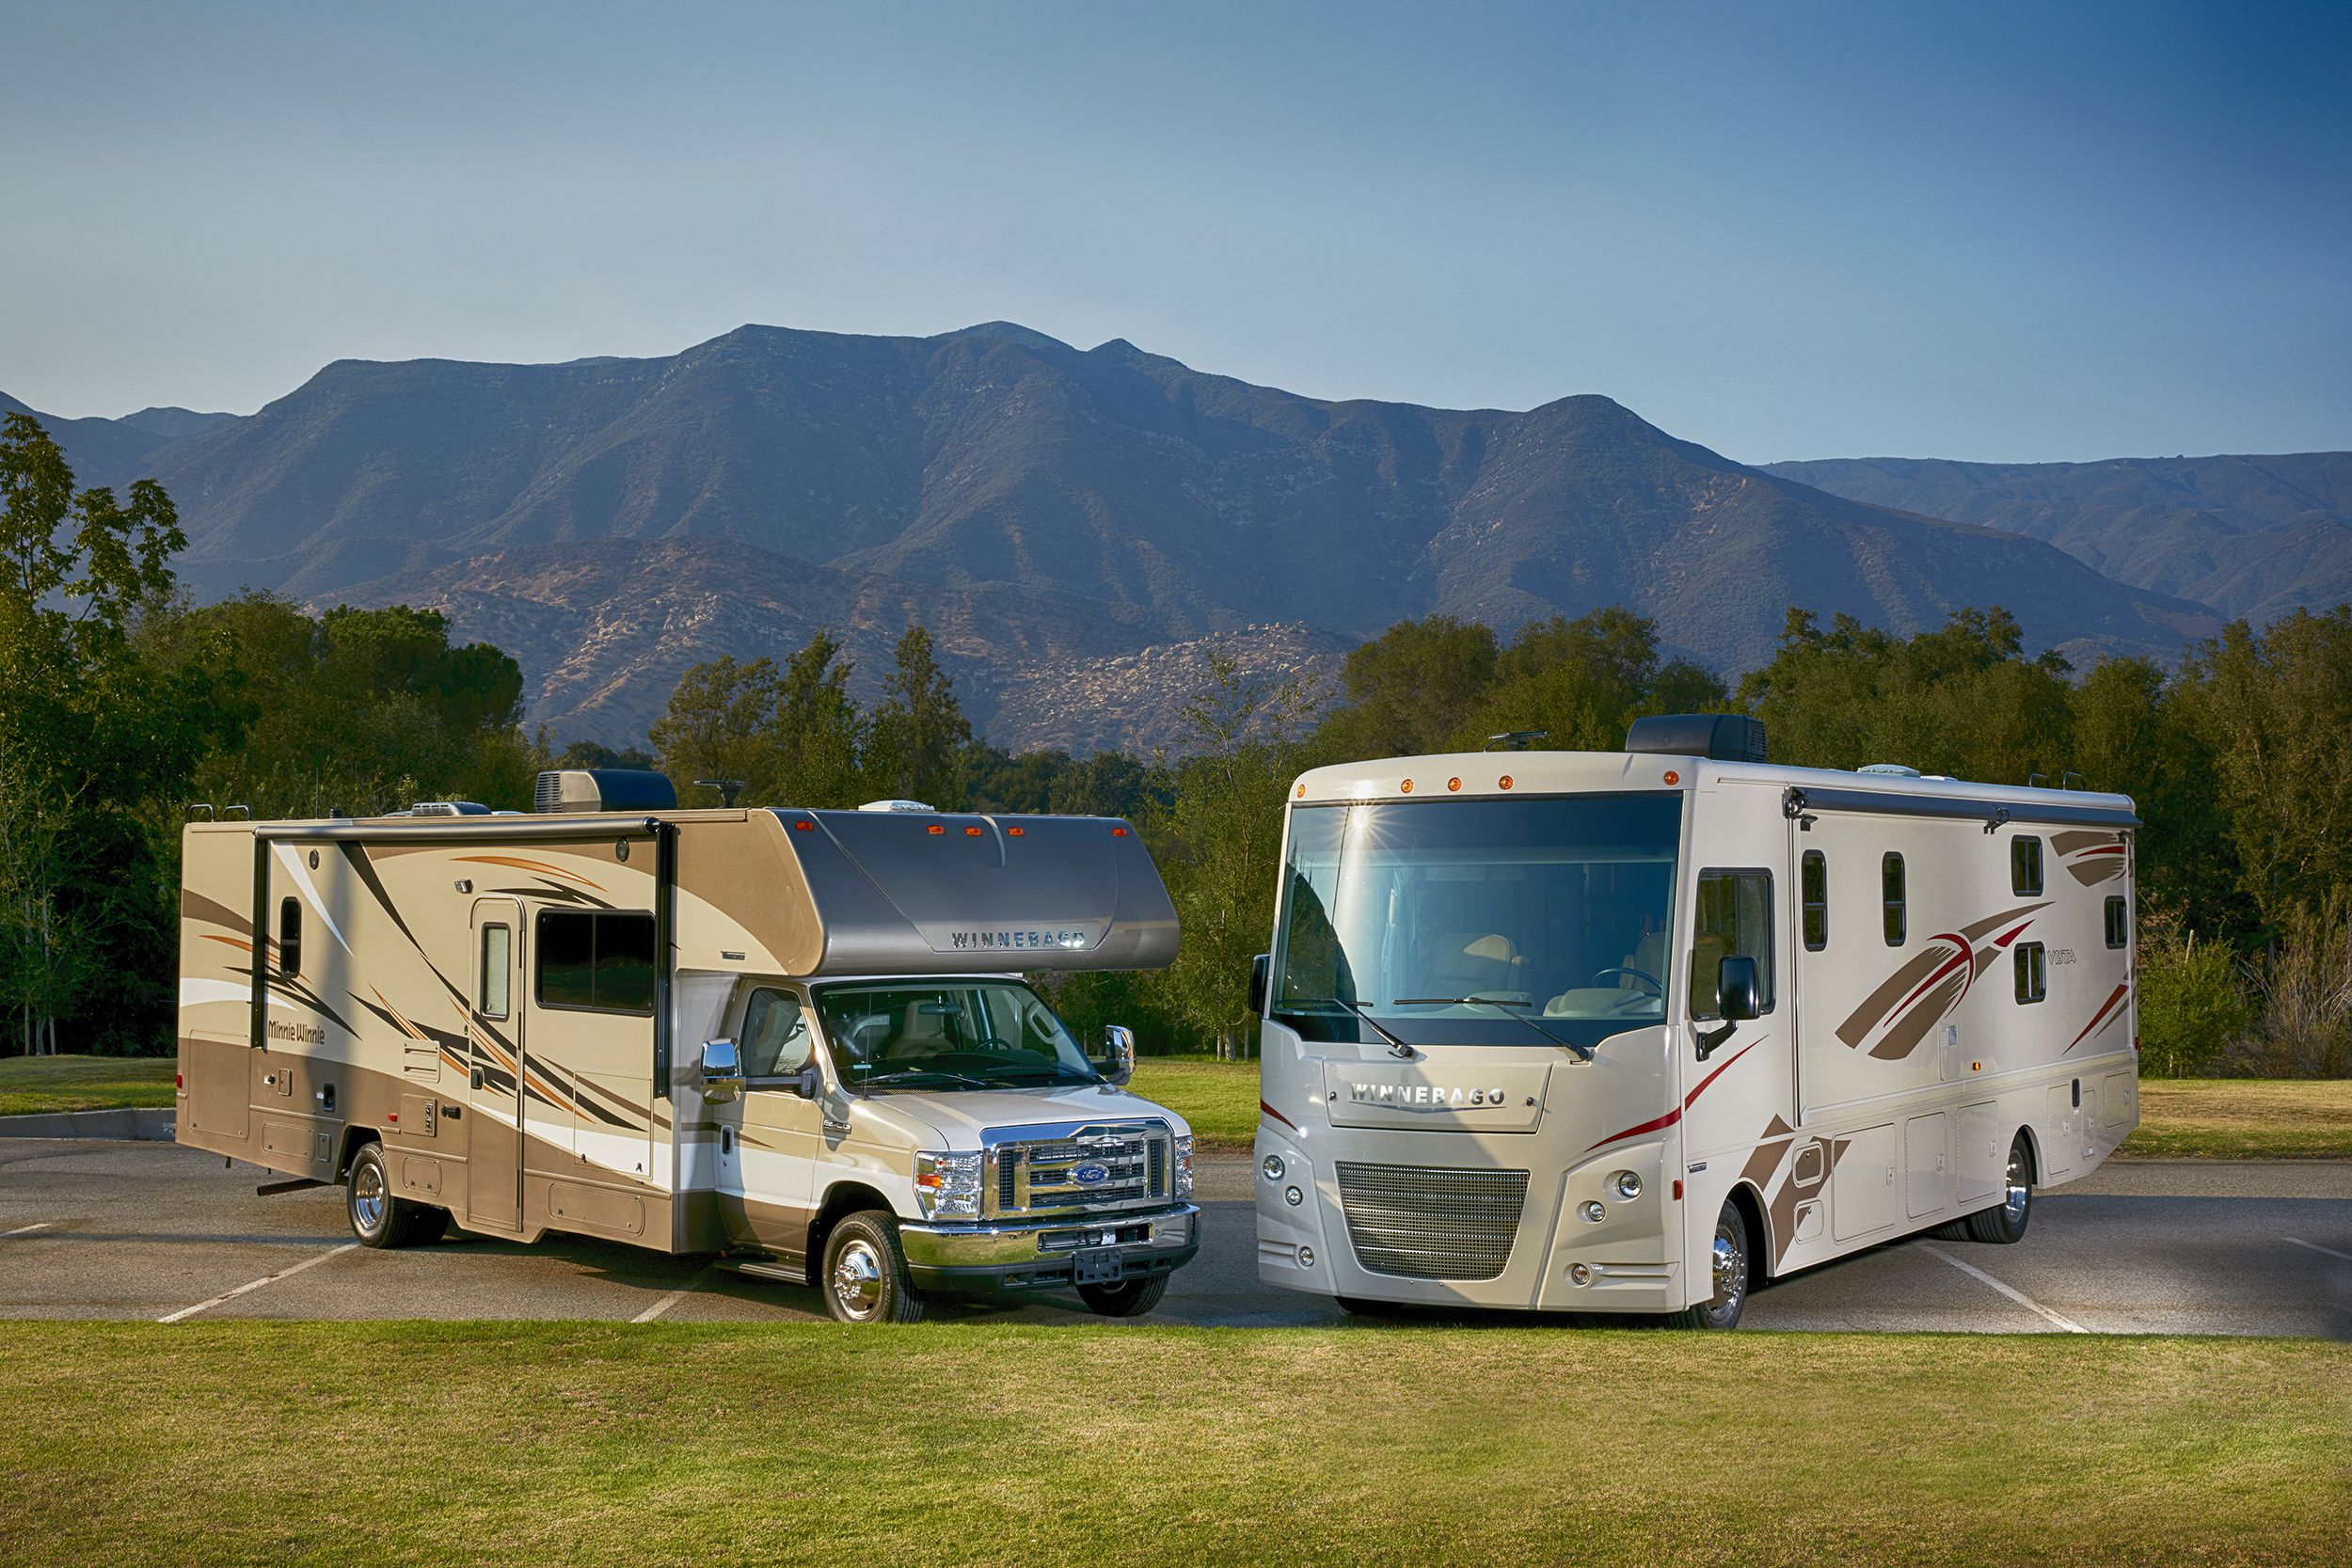 <p><b>Most common issue:</b> Low-quality materials and construction </p><p>Winnebago is a popular brand, but there are more than 1,000 recalls for its RVs. Problems range from electrical issues to unsecured furniture. Low-quality materials and labor might save you money initially, but in the long run will bite you </p>